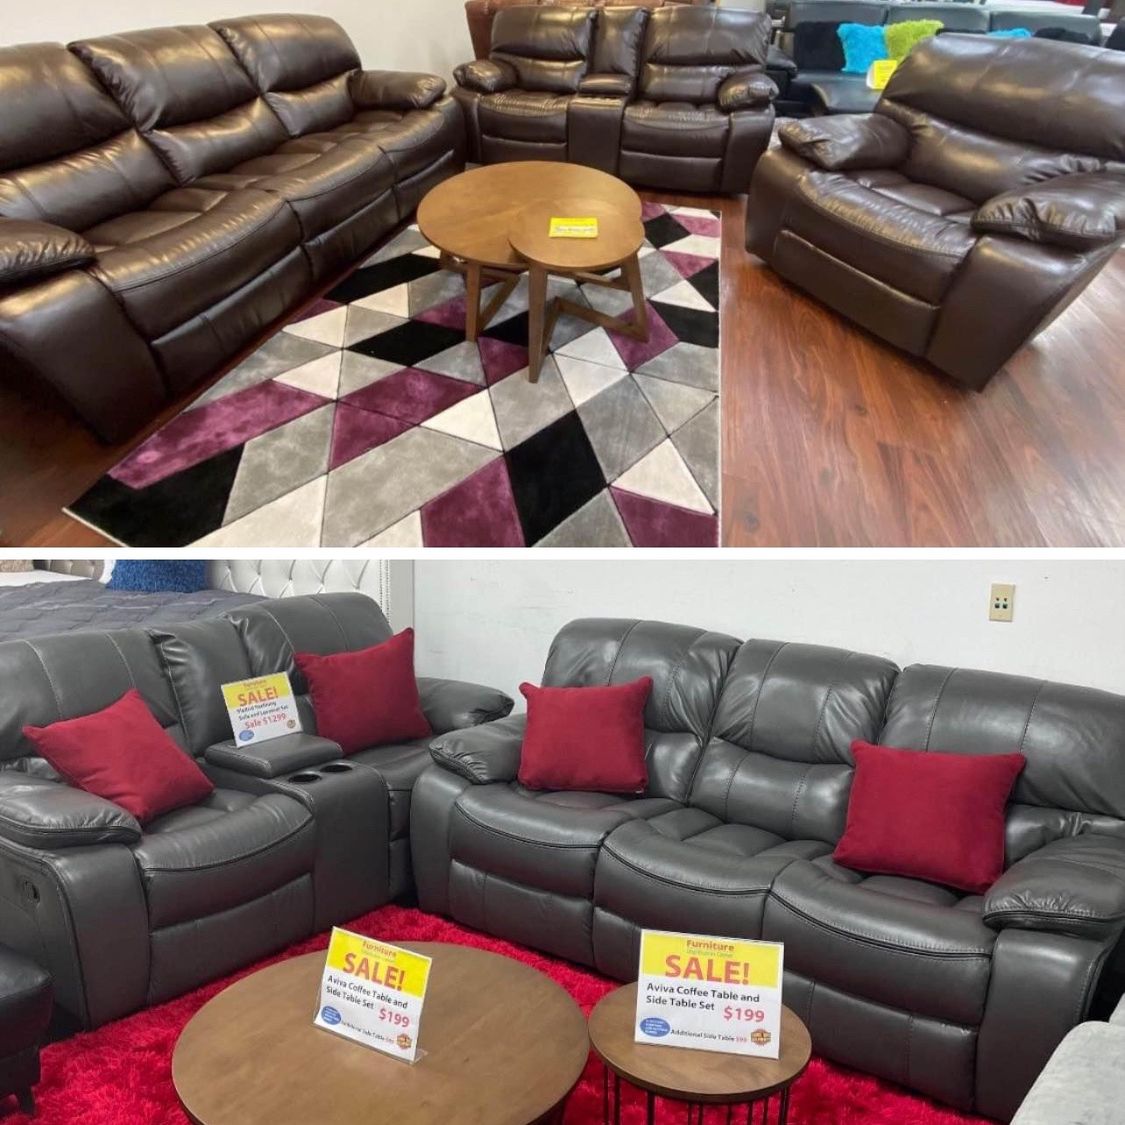 Spring Sale Event! Madrid, Leather Reclining Sofa And Loveseat Only $899. Easy Finance Option. Same Day Delivery.